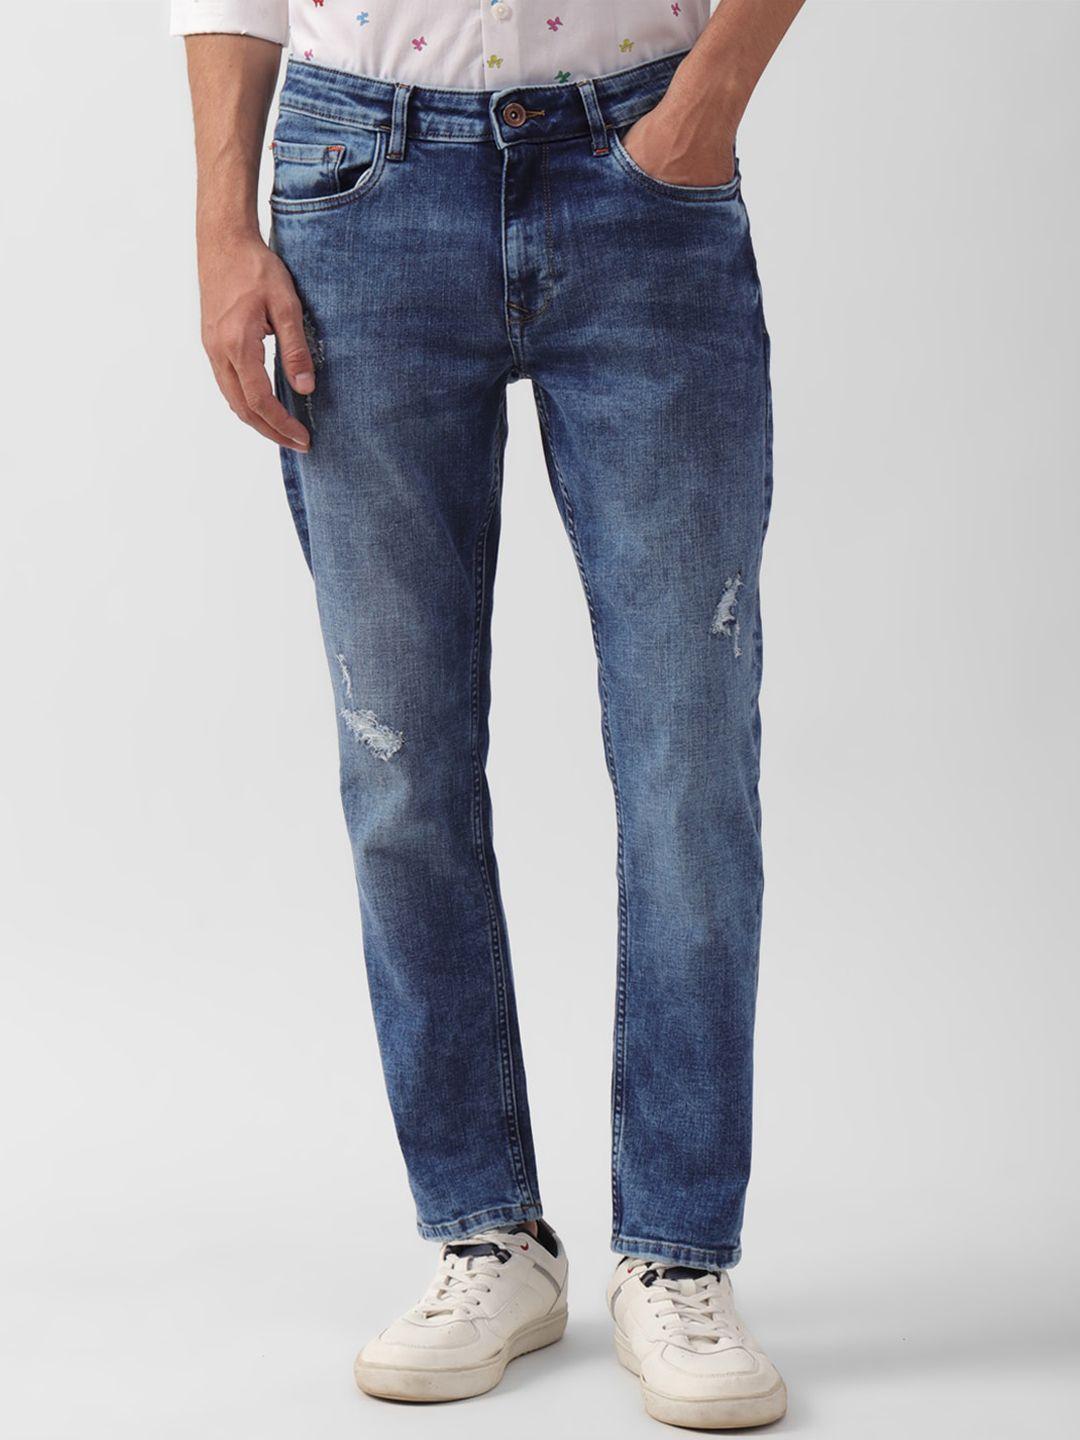 simon carter london men mildly distressed heavy fade ripped stretchable jeans